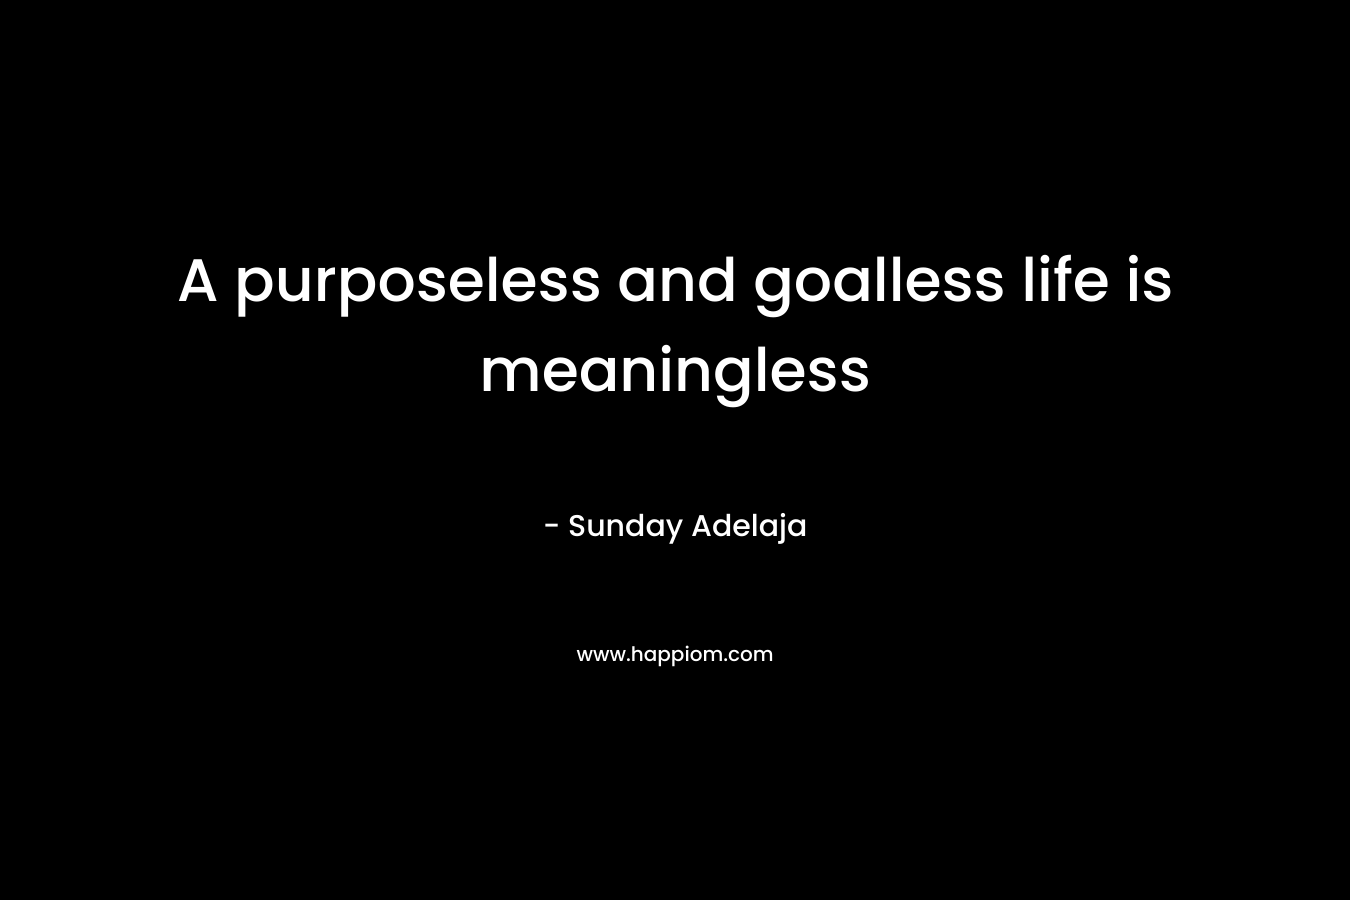 A purposeless and goalless life is meaningless